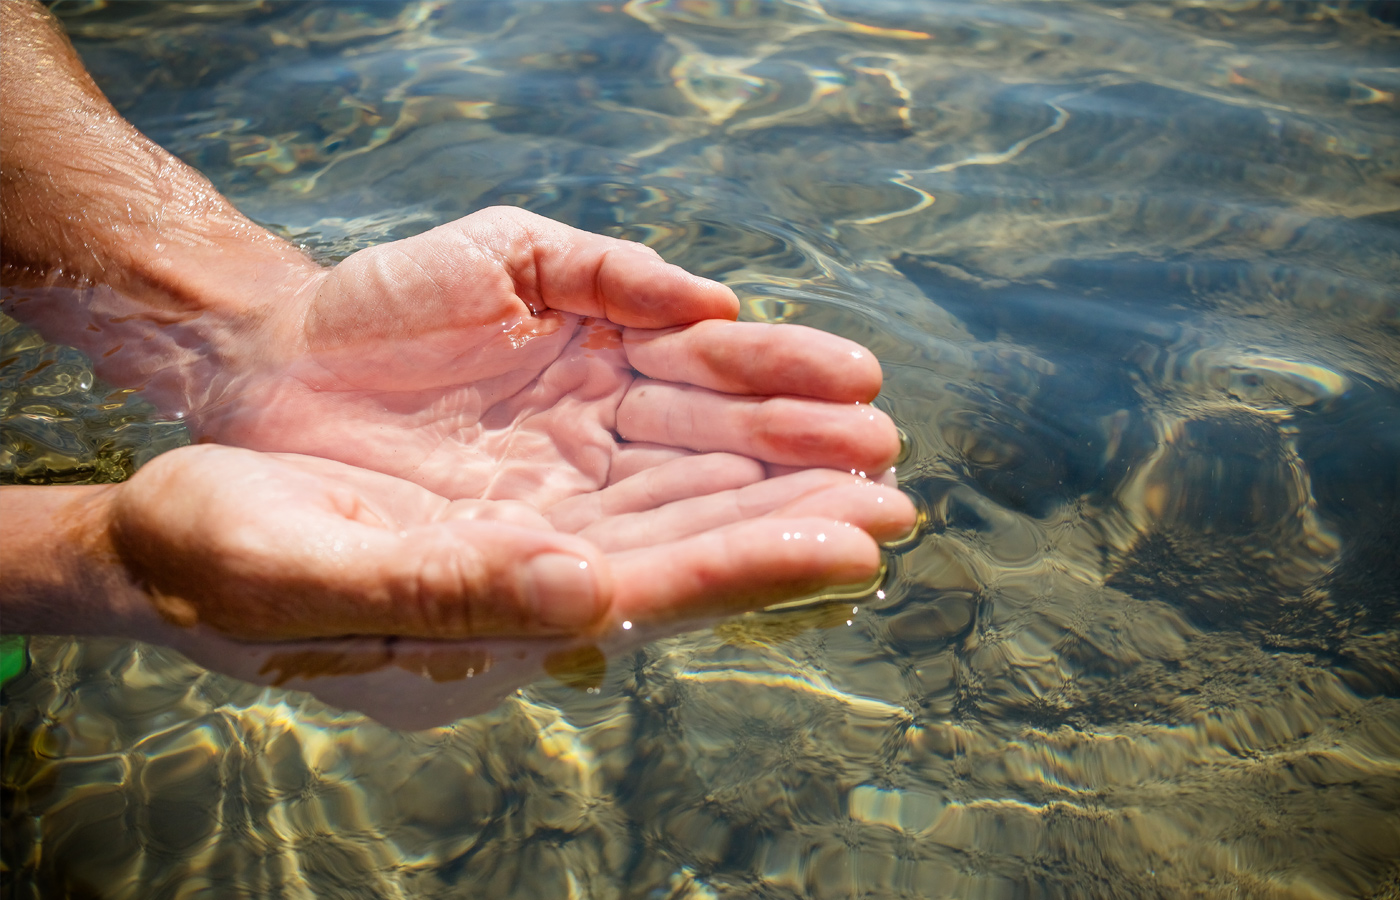 Image of hands in clear sea water.